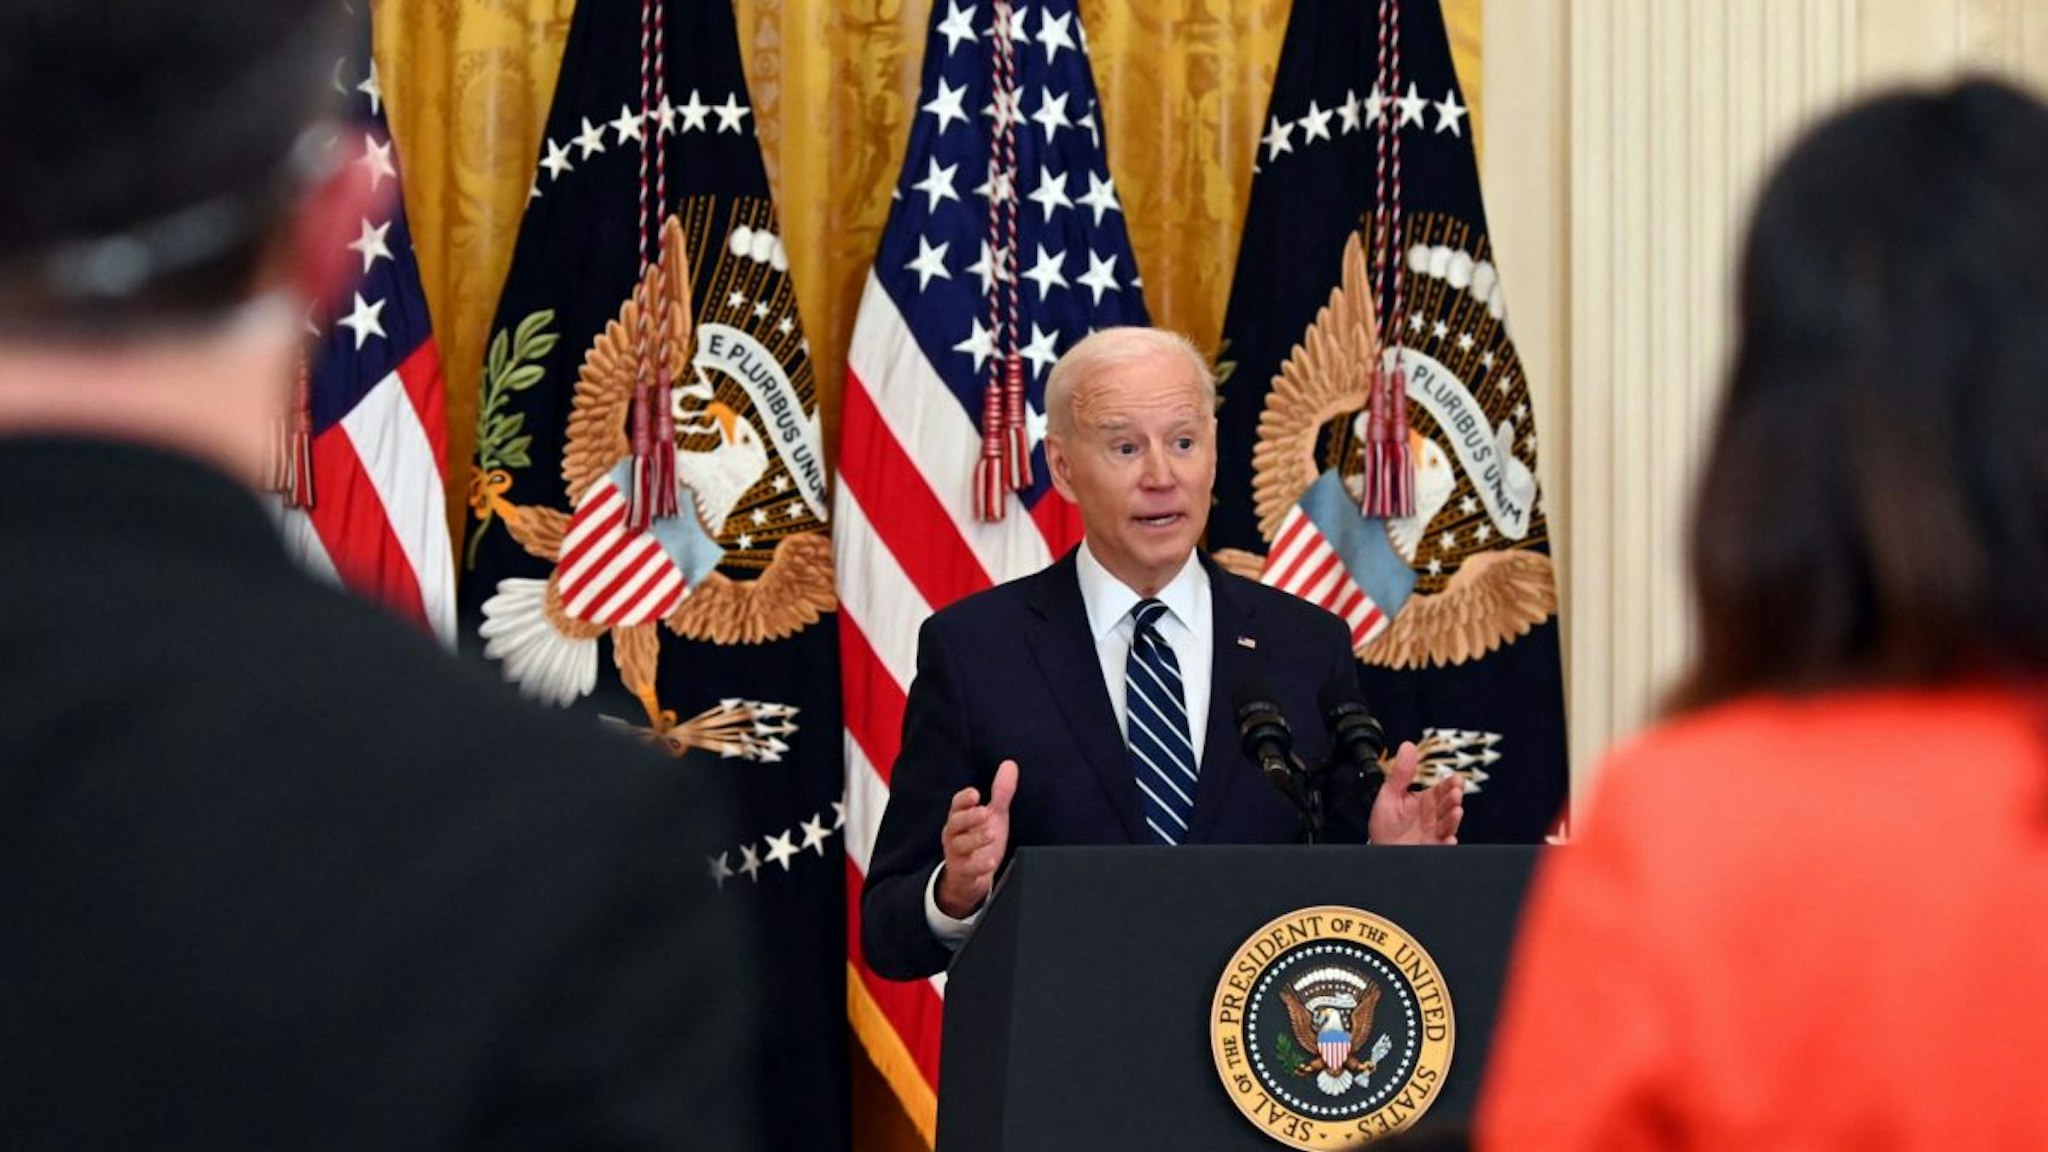 US President Joe Biden answers a question during his first press briefing in the East Room of the White House in Washington, DC, on March 25, 2021.